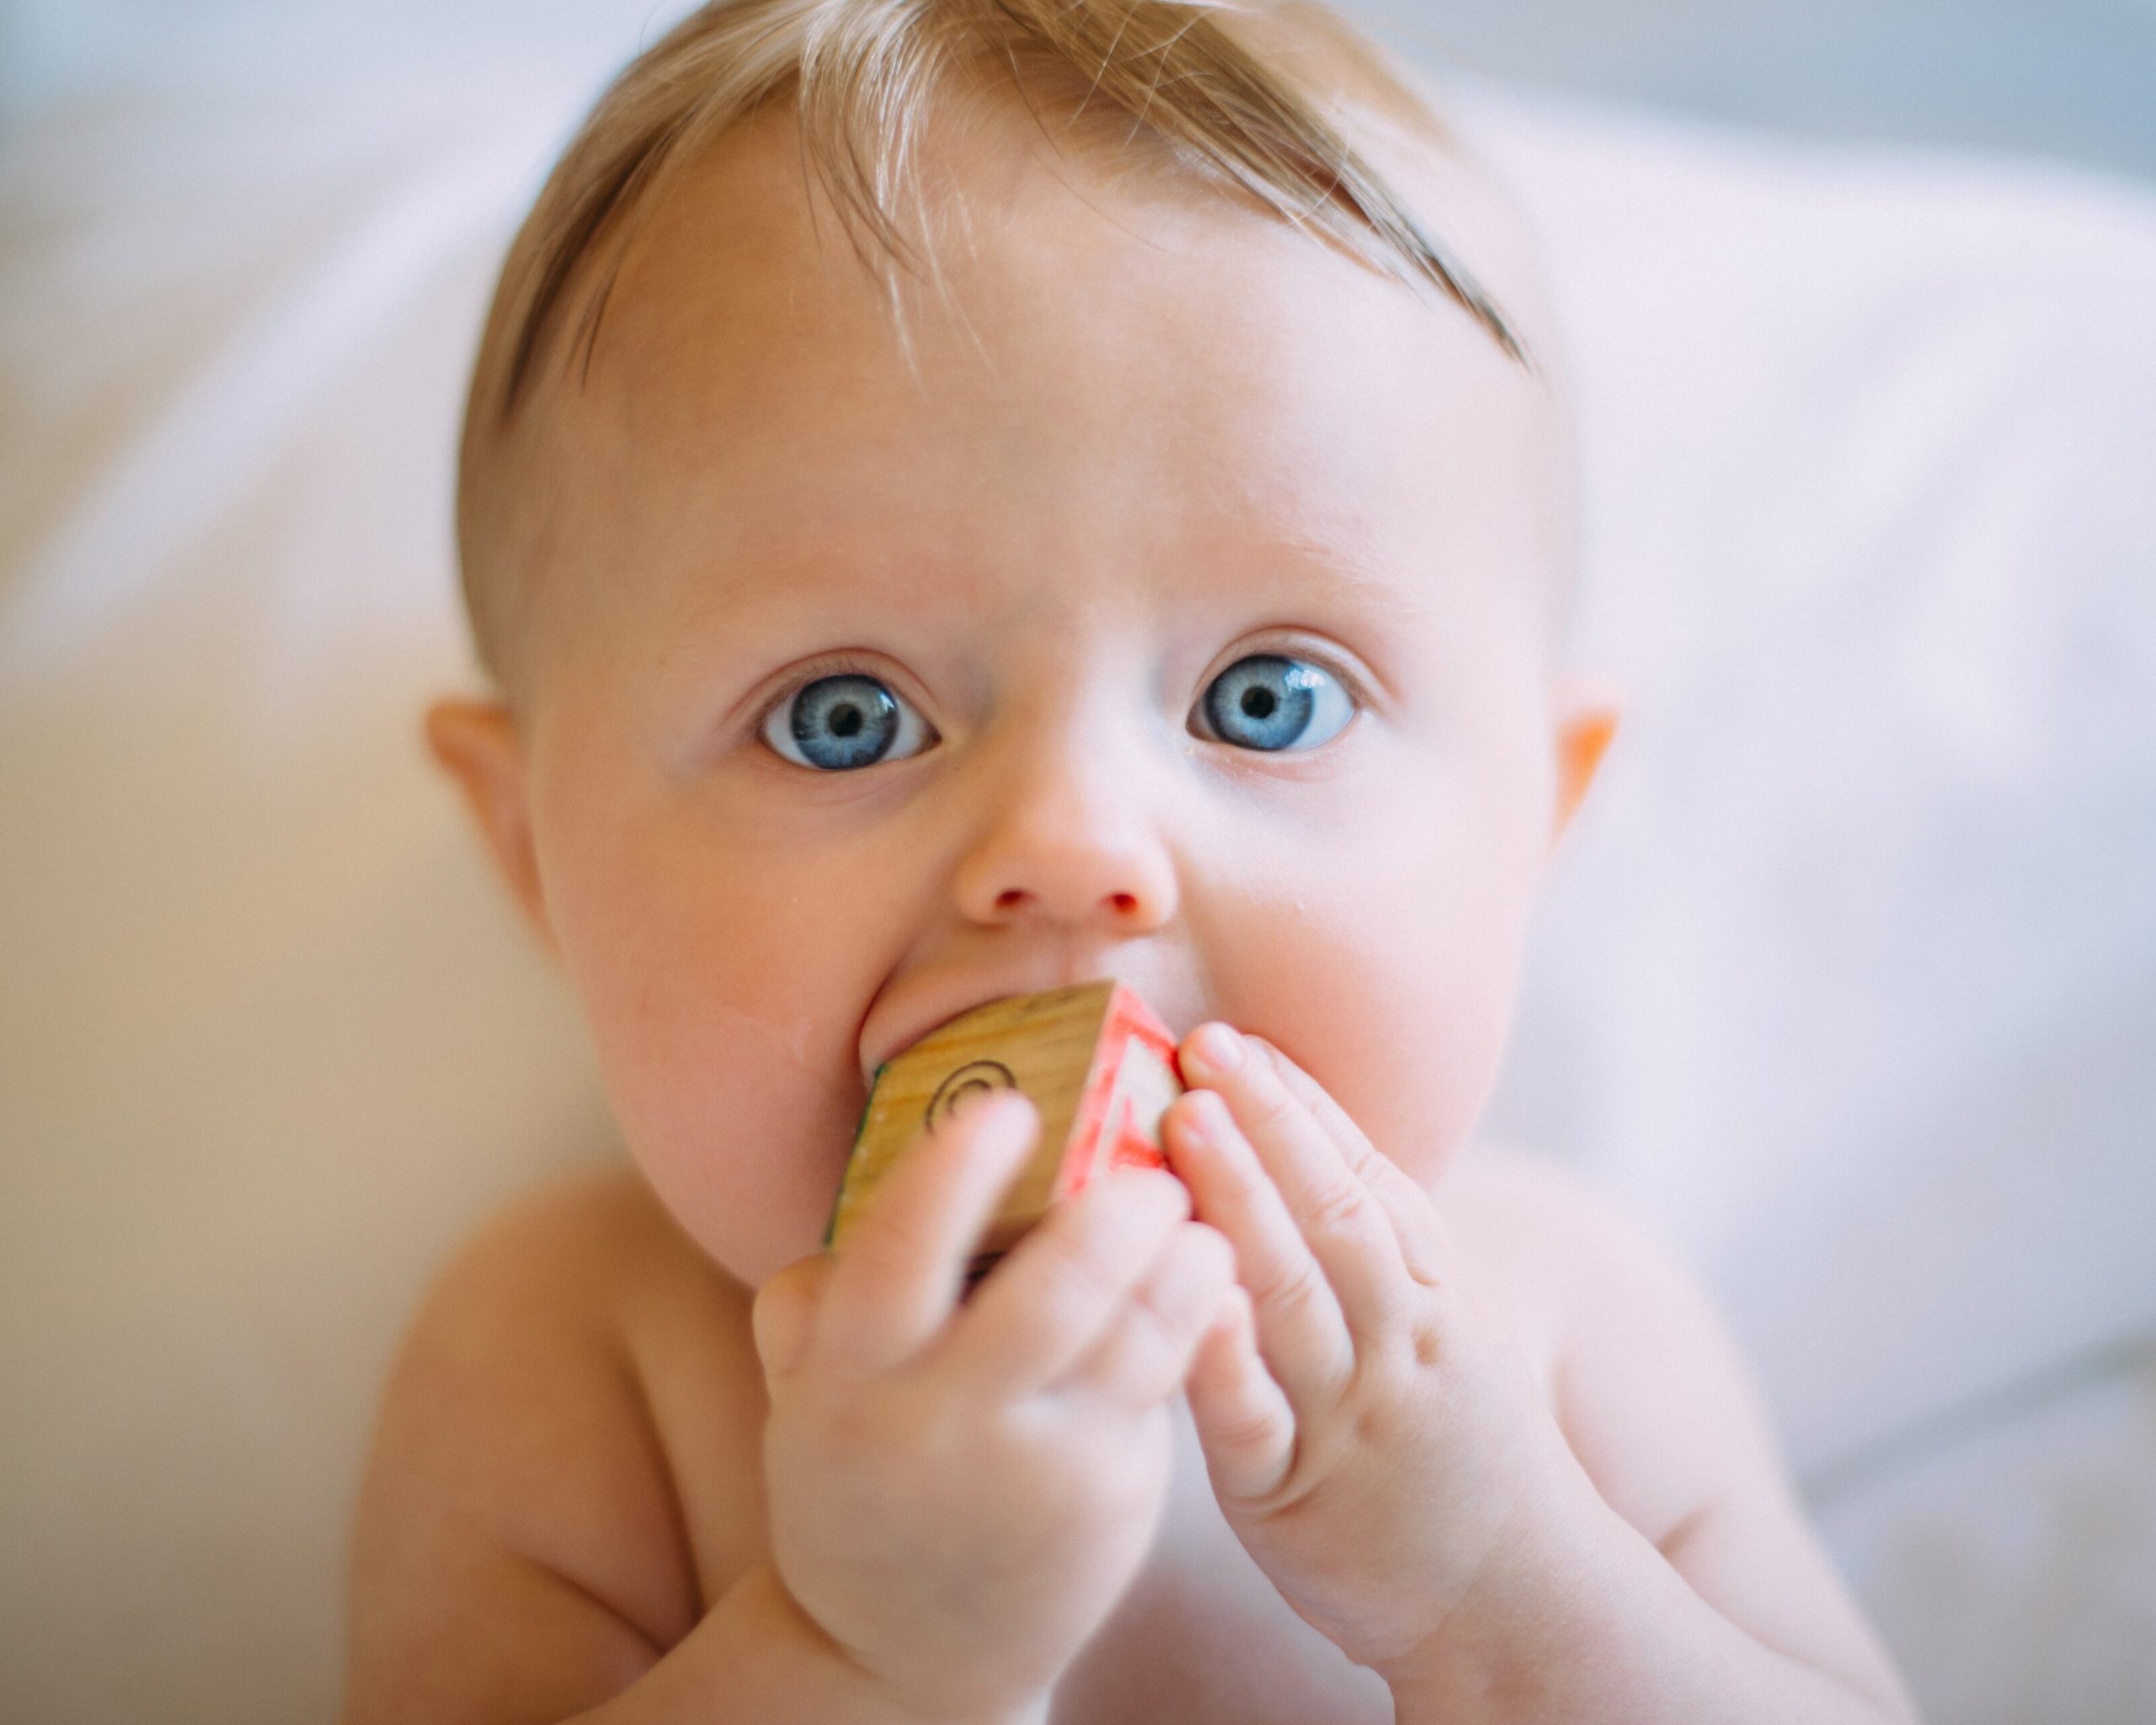 Baby with food sensitivities